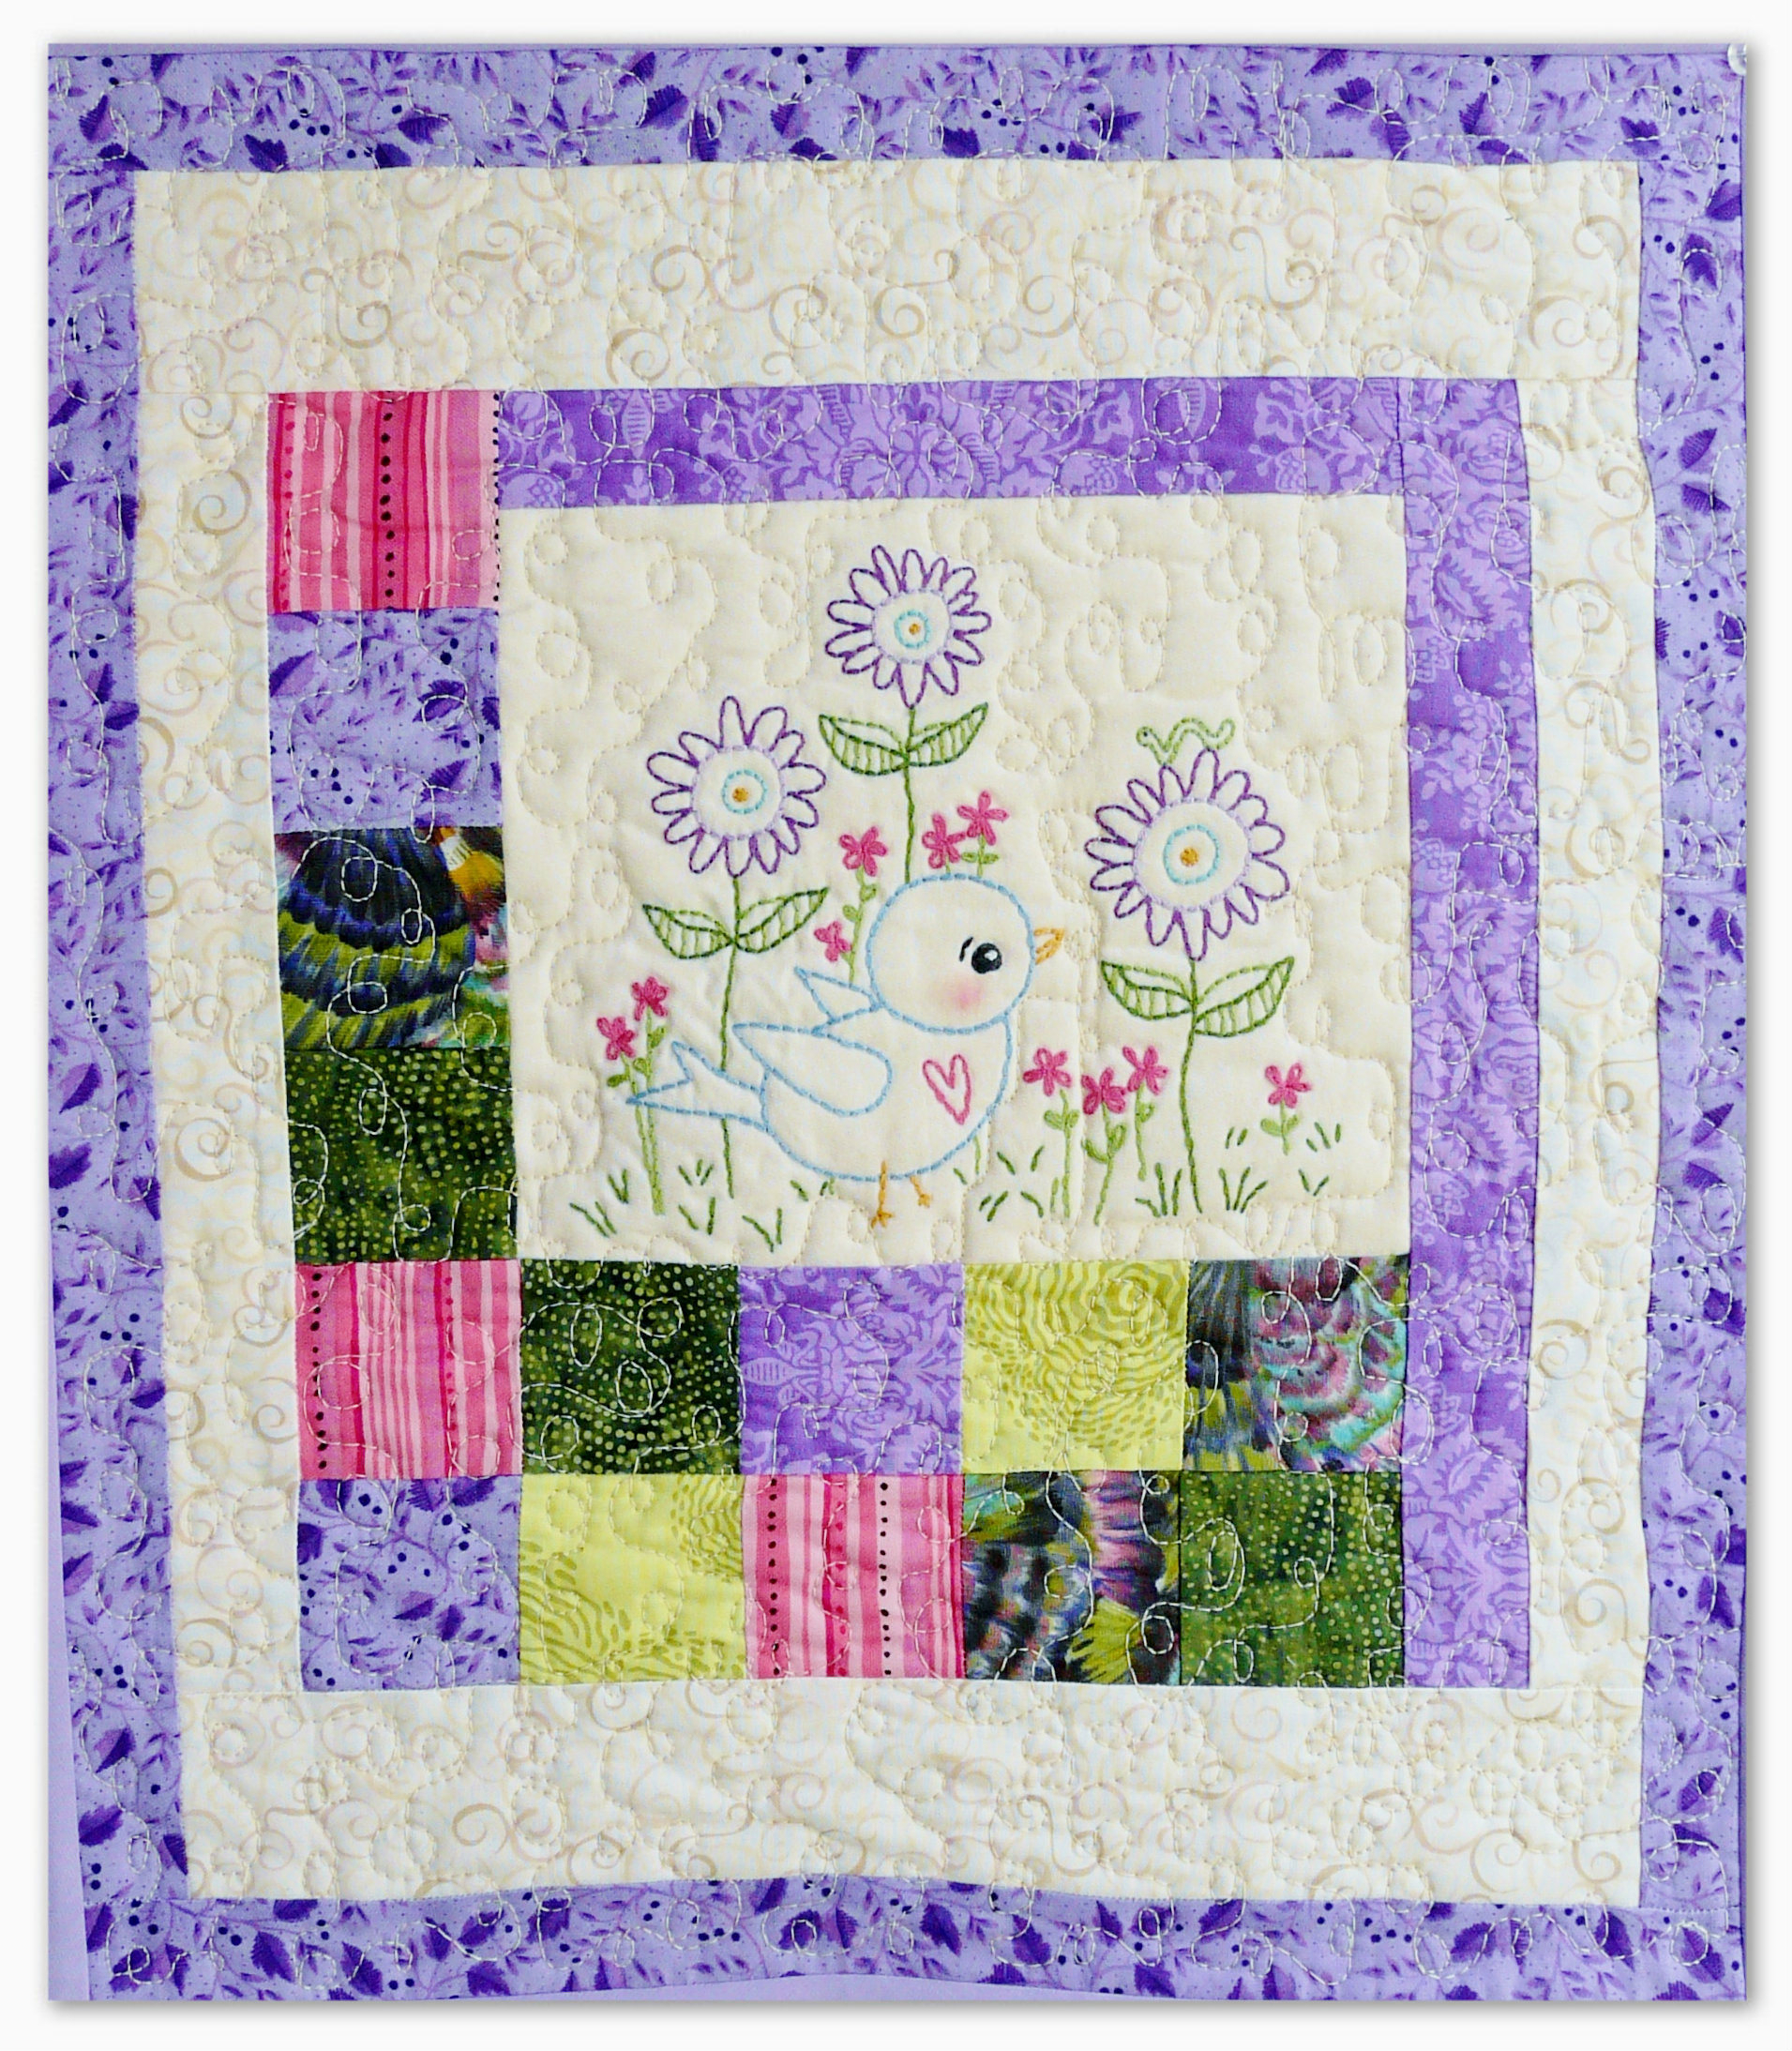 Hand Embroidery Patterns For Quilts Blue Bird Of Happiness Embroidery Pattern Pdf Quilt Stitchery Hand Flowers